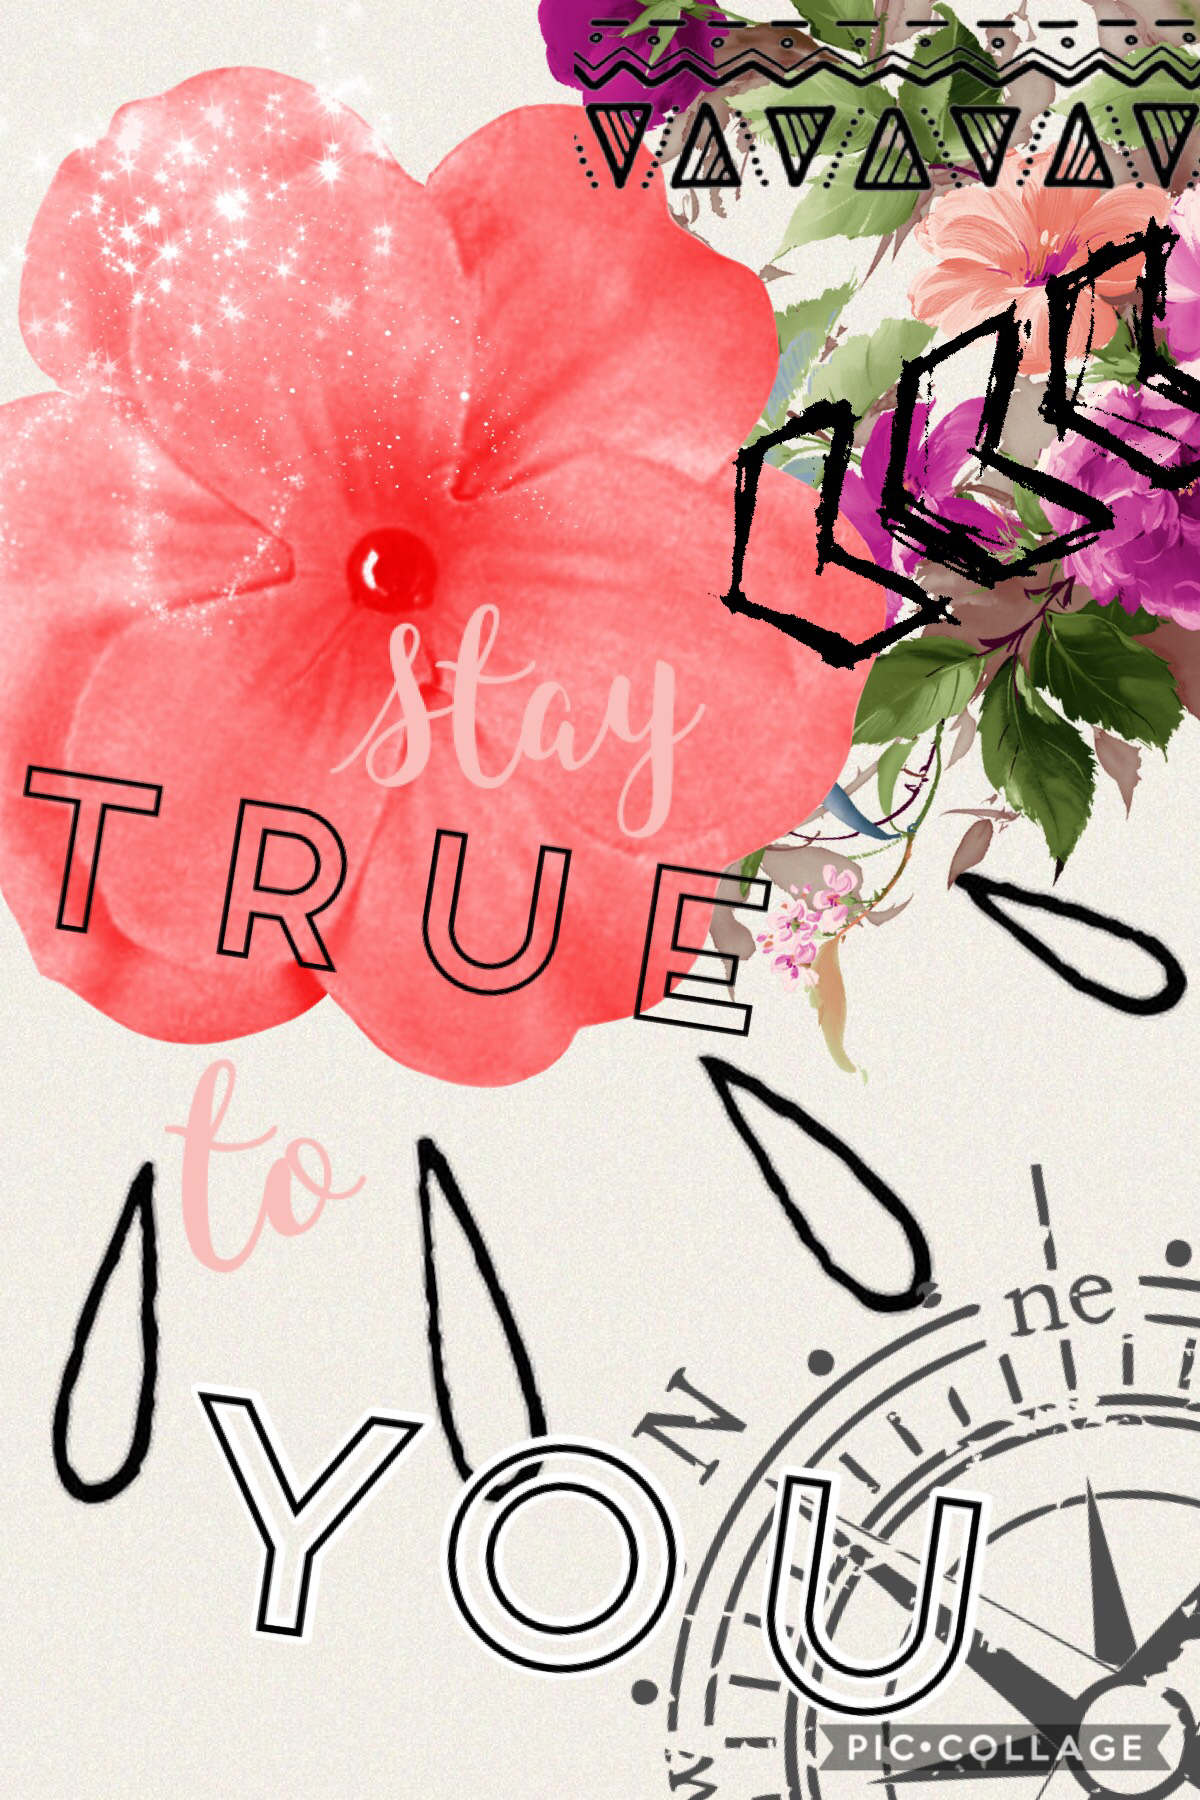 I kinda randomly got the inspiration to do this... I hope you like it!! Remember: stay true to you 